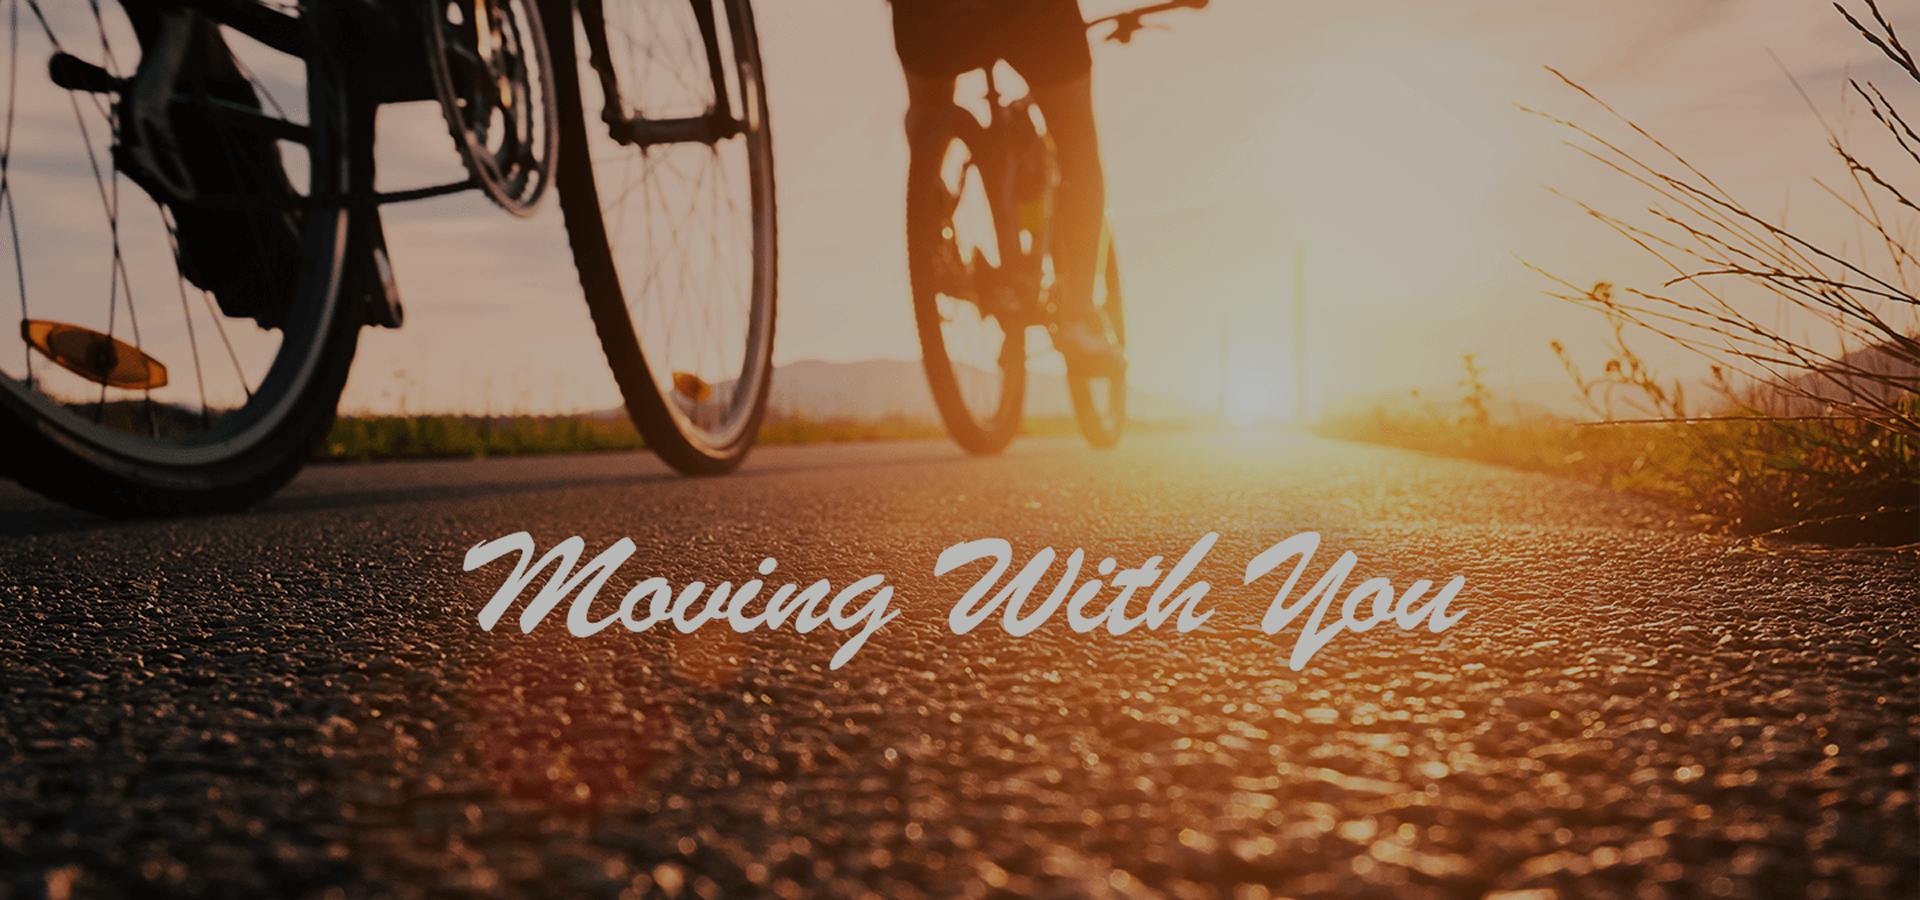 Moving with you